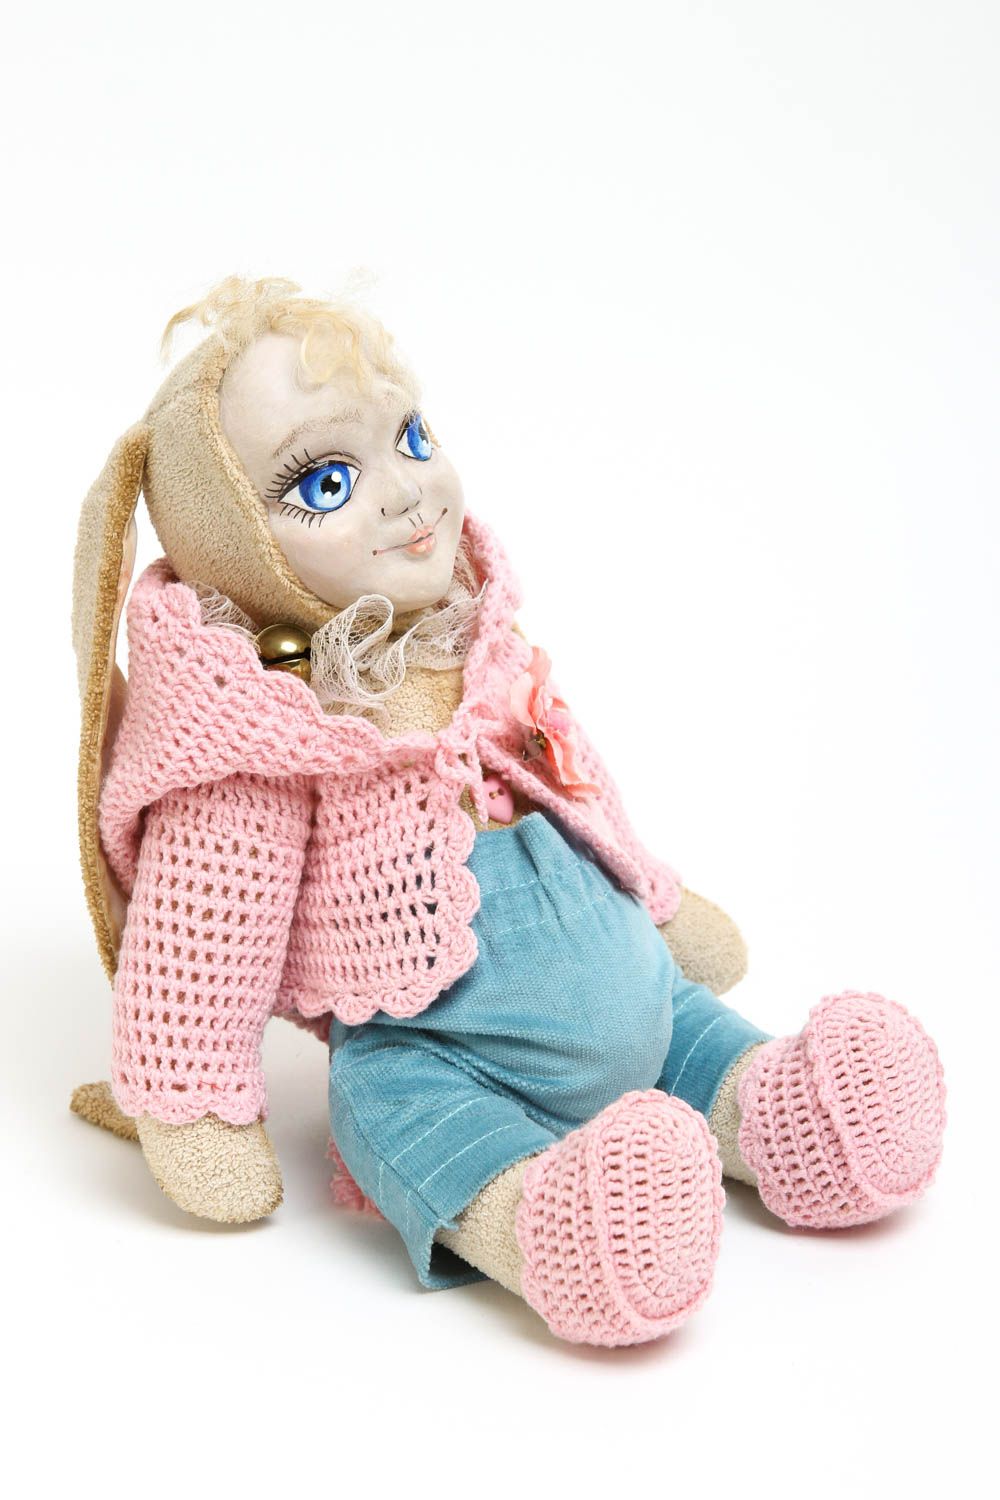 Handmade soft doll designer toys collectible doll home decor unique gifts photo 3